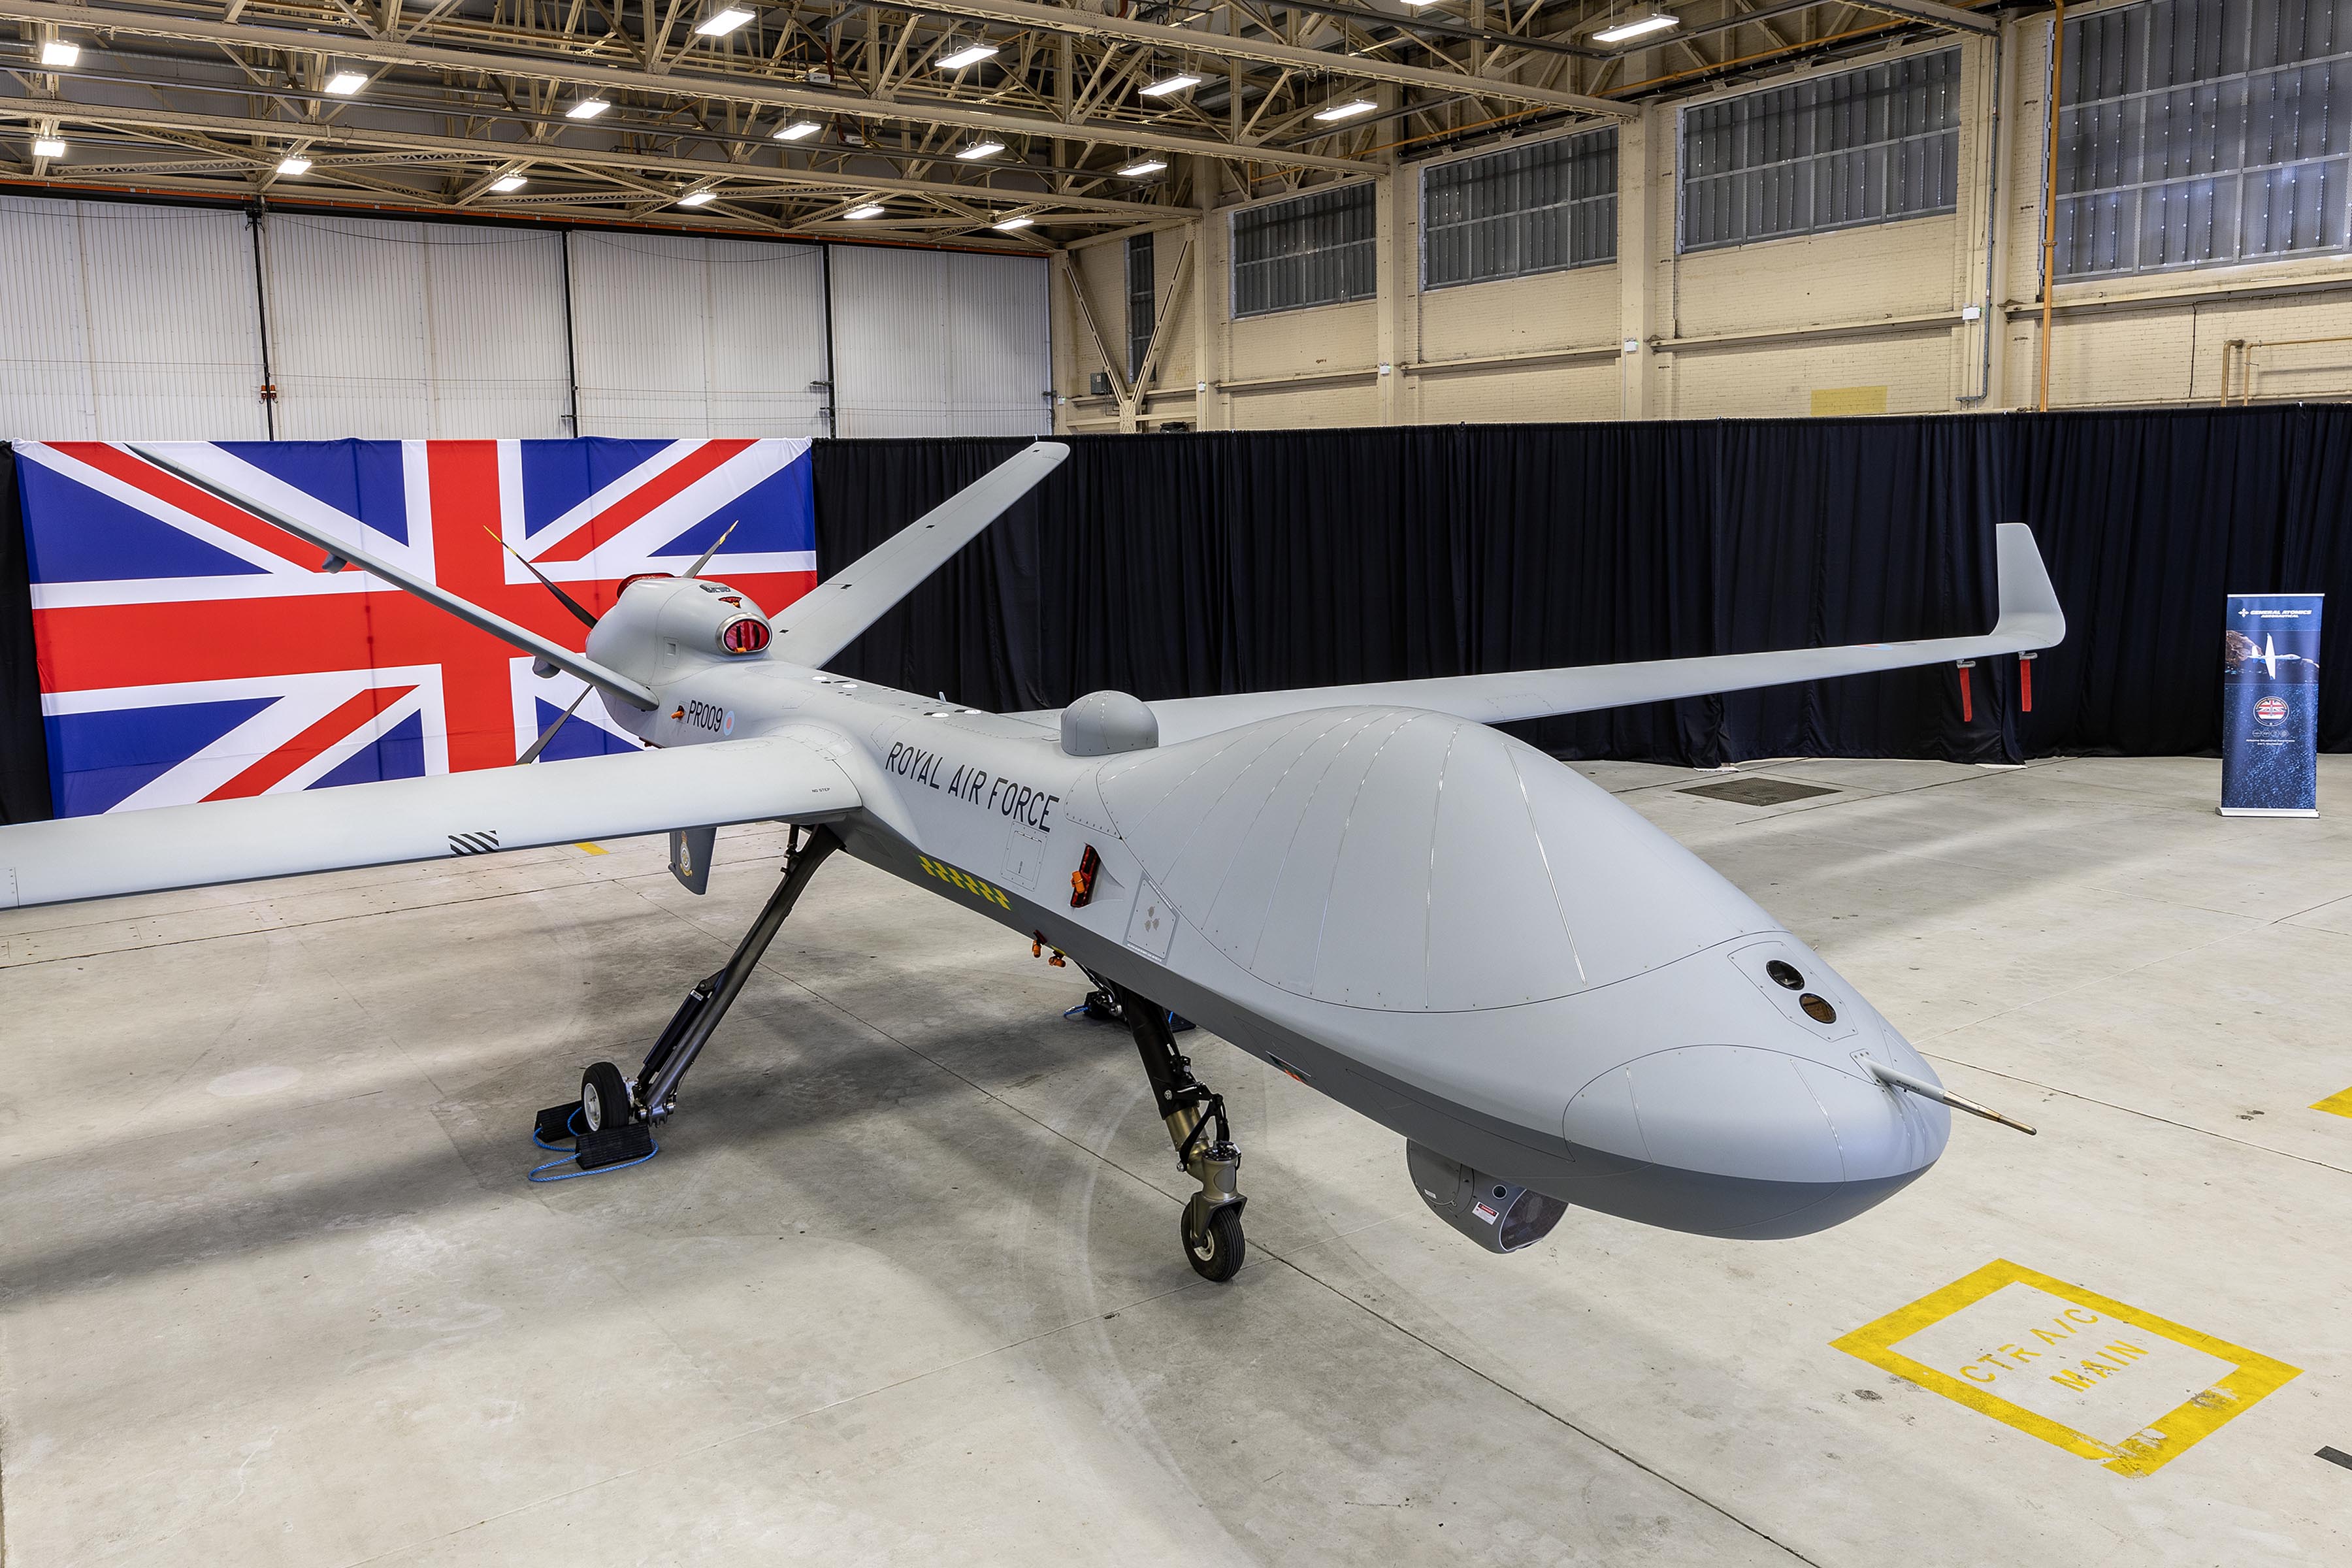 The UK Royal Air Force has received the first US Protector RG Mk1 strike and reconnaissance drone-2